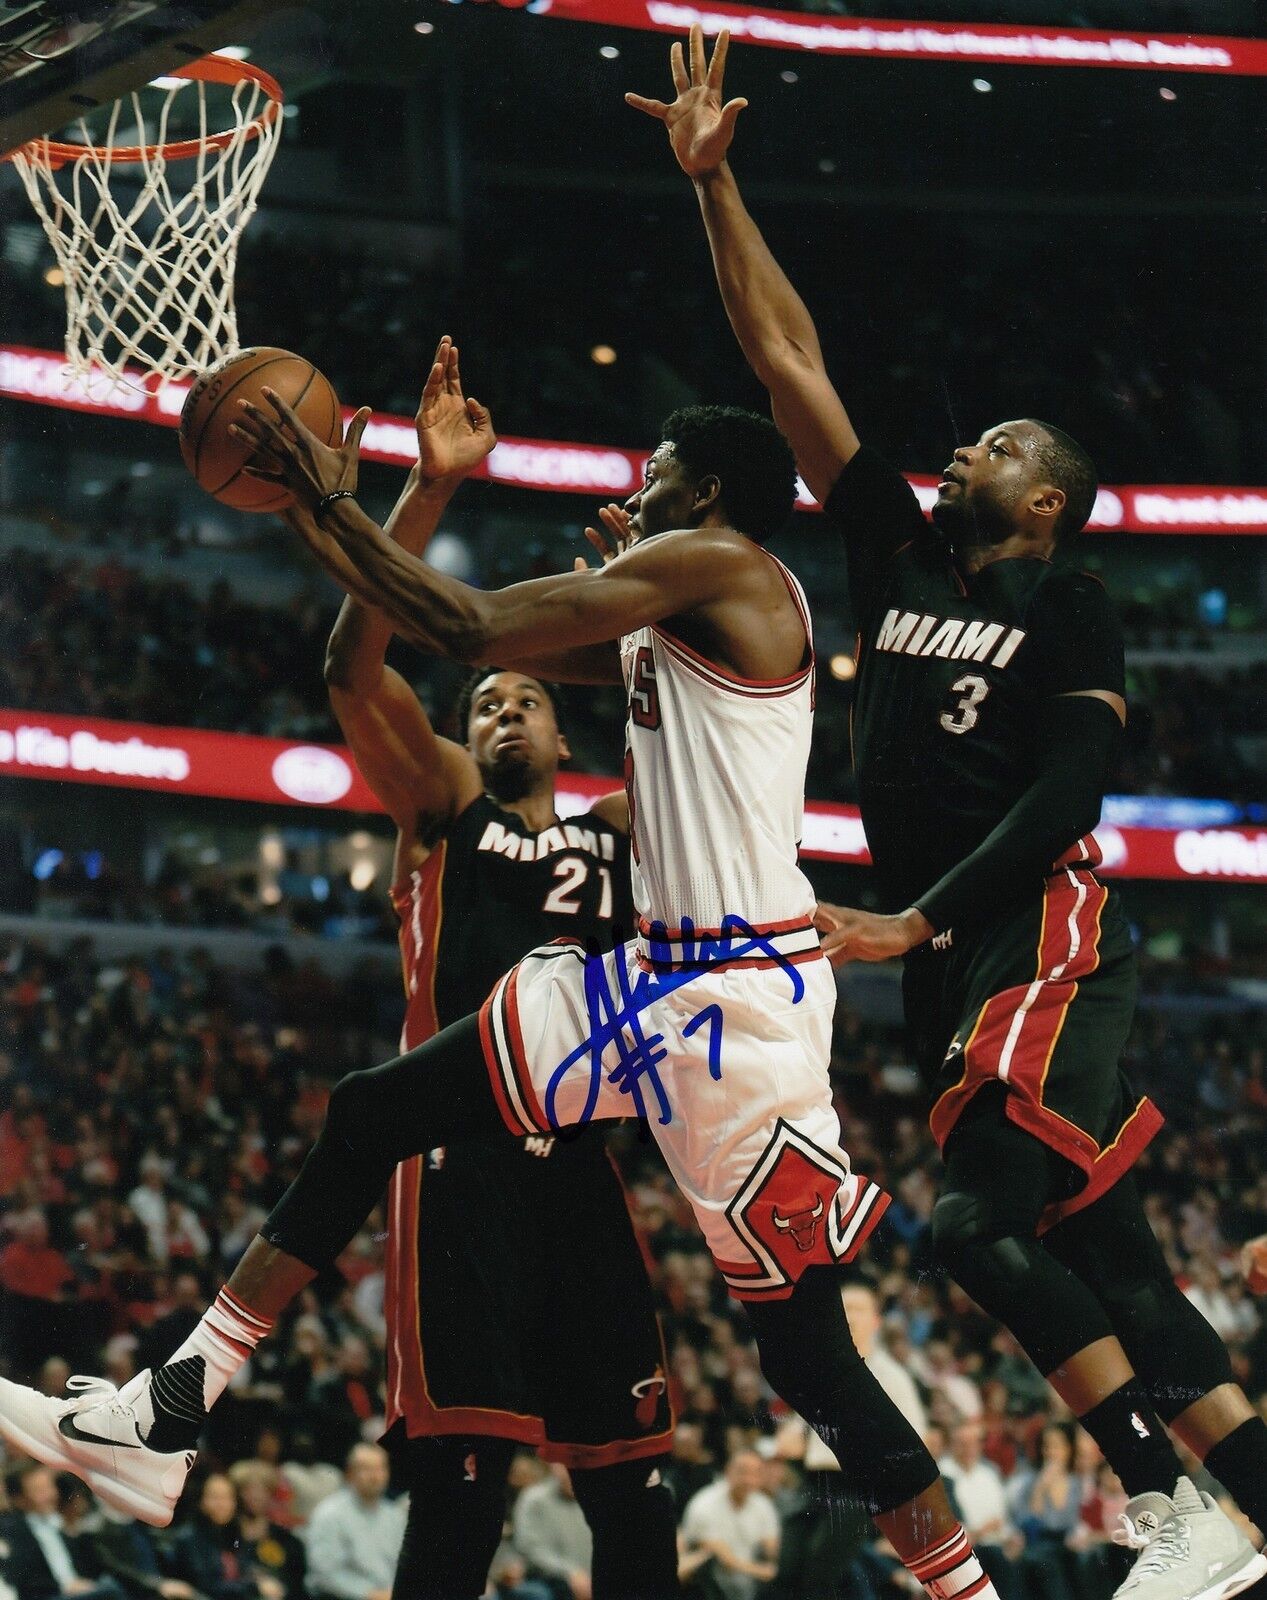 JUSTIN HOLIDAY signed (CHICAGO BULLS) autographed BASKETBALL 8X10 Photo Poster painting W/COA #2